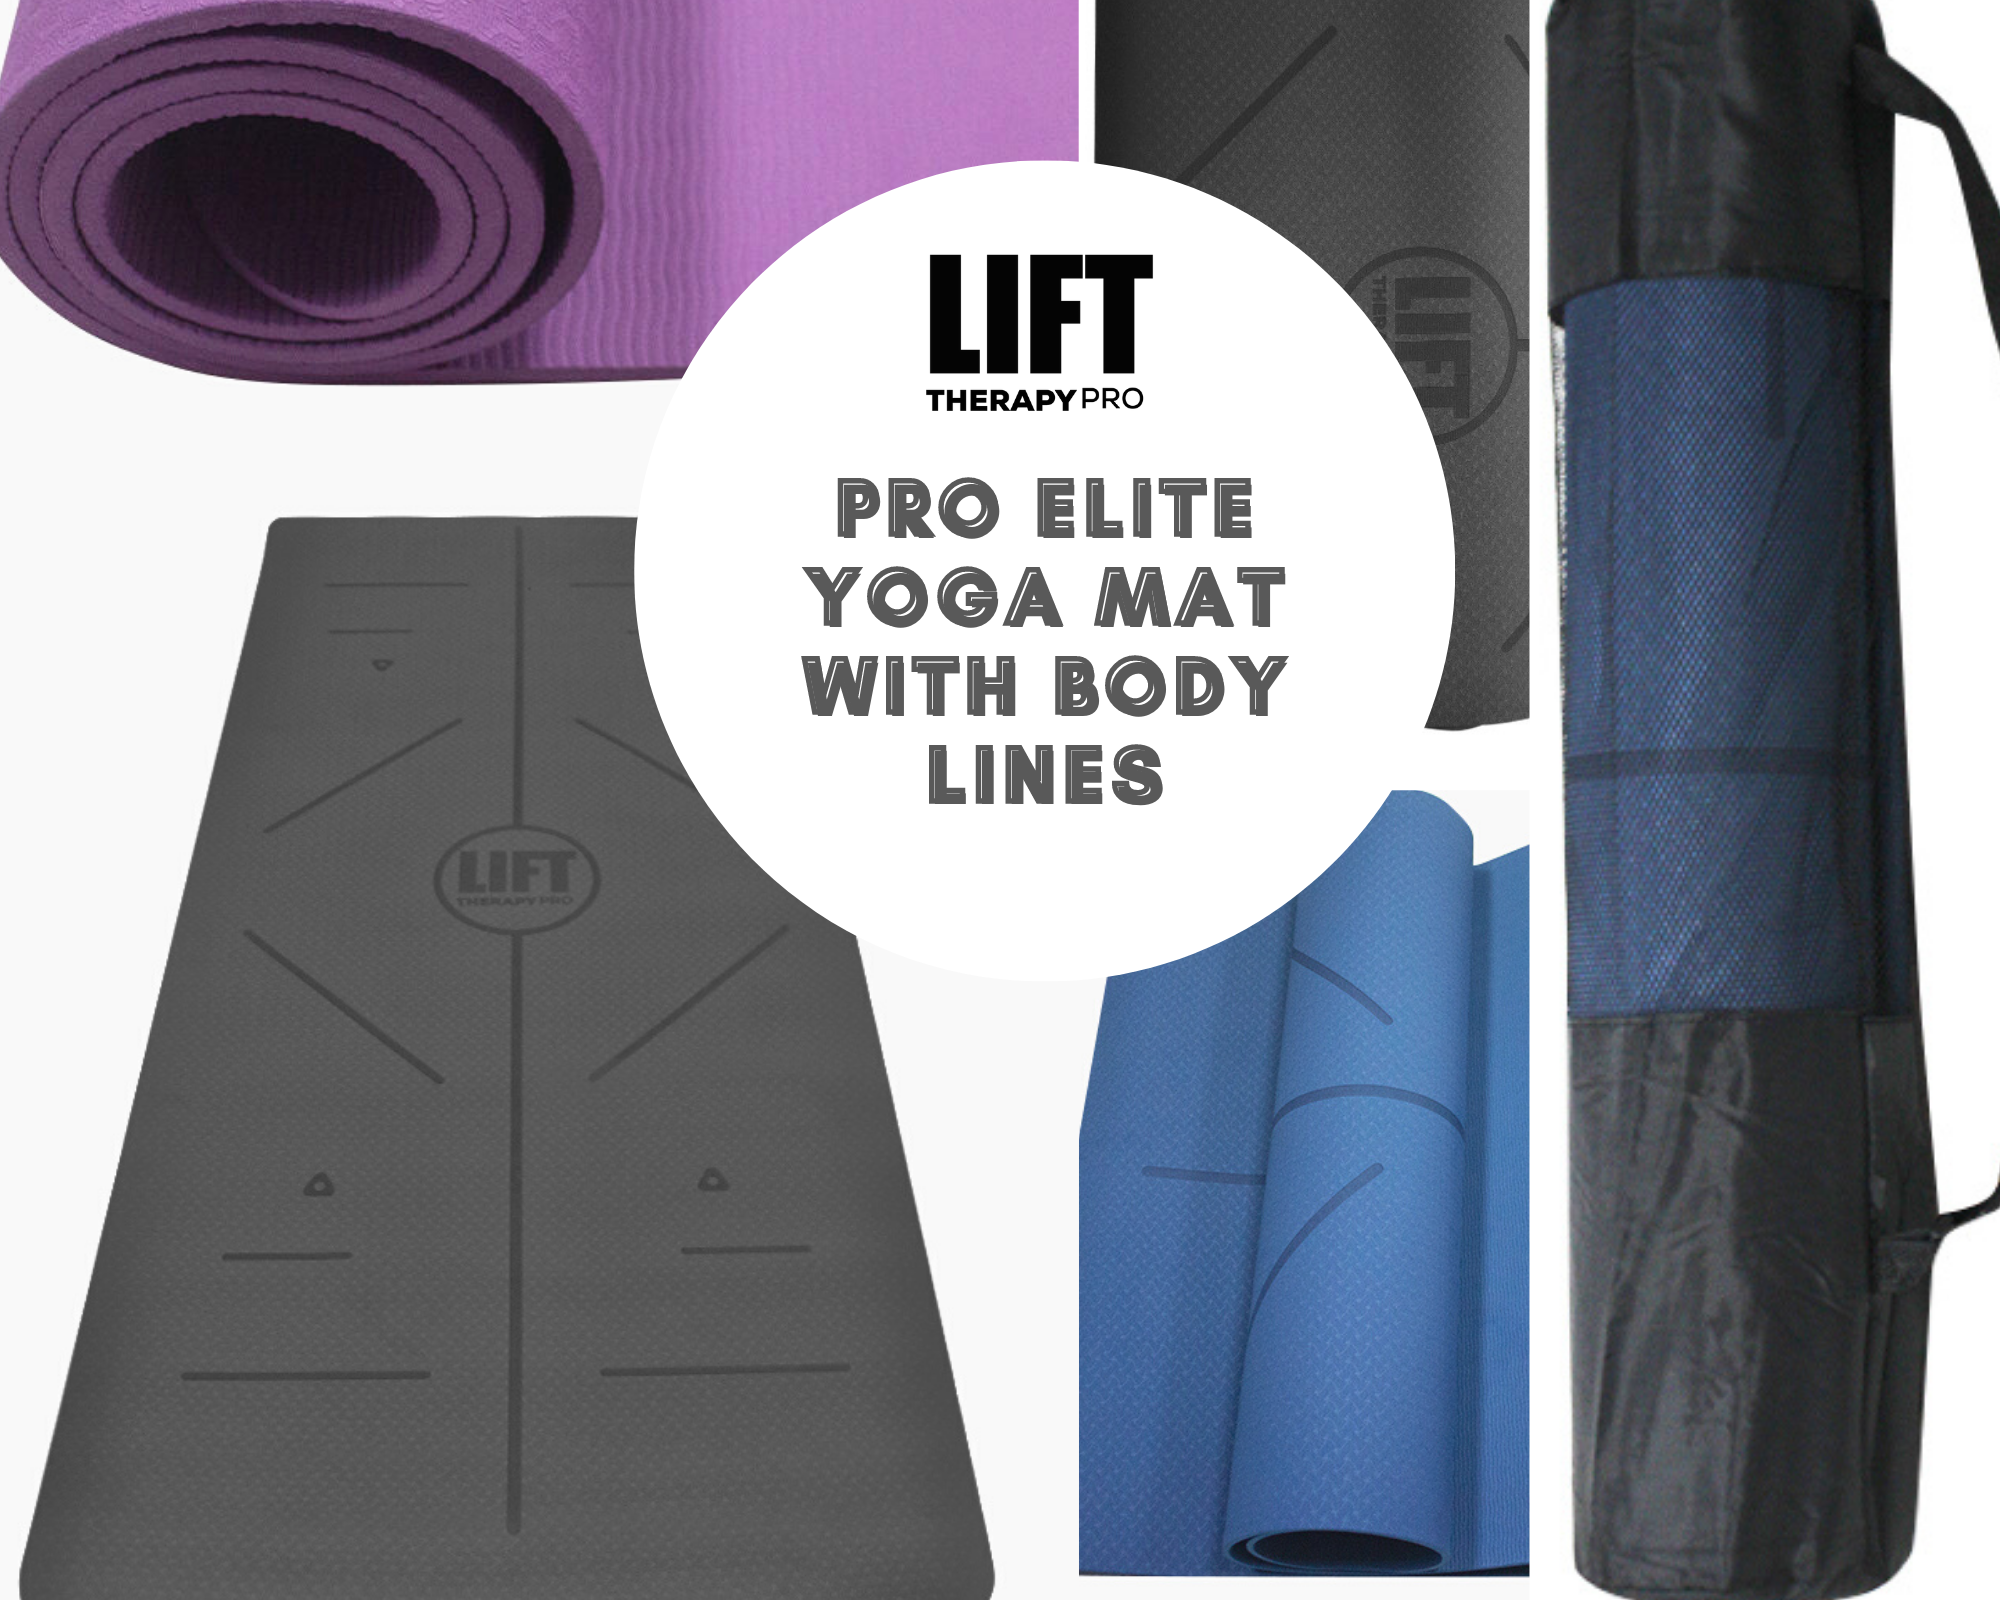 PRO ELITE LONG YOGA MAT WITH BODY LINES – Lift Therapy PRO